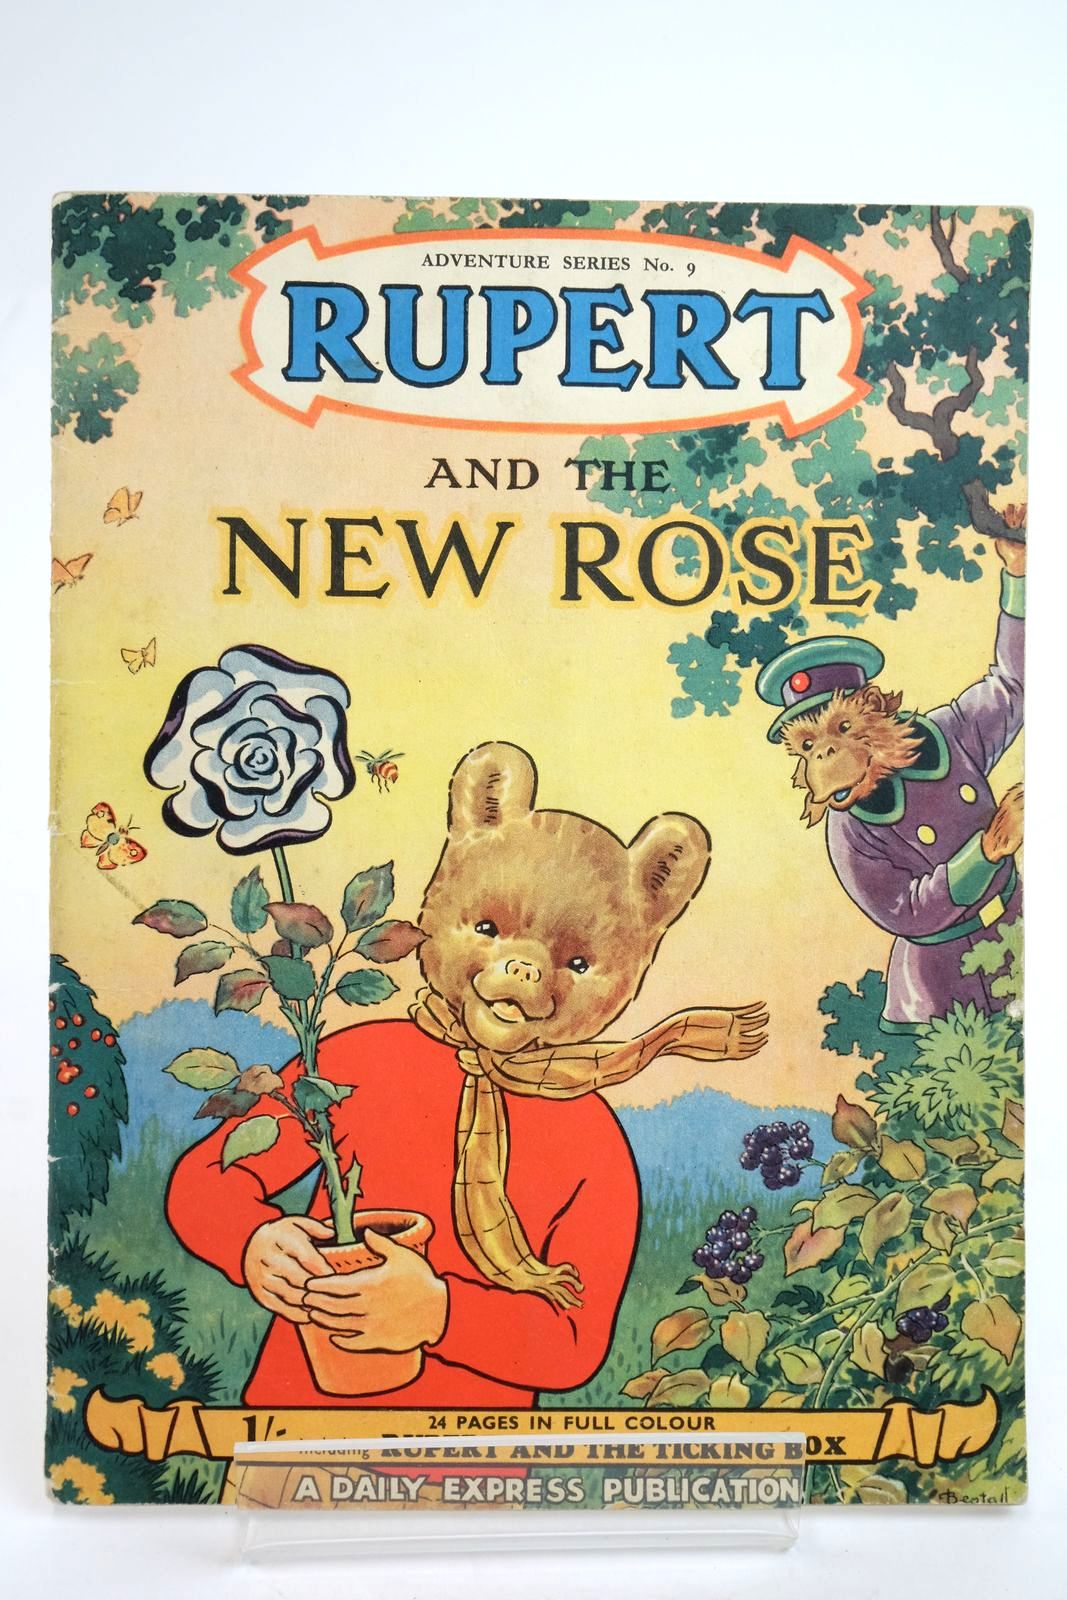 Photo of RUPERT ADVENTURE SERIES No. 9 - RUPERT AND THE NEW ROSE written by Bestall, Alfred illustrated by Bestall, Alfred published by Daily Express (STOCK CODE: 2135861)  for sale by Stella & Rose's Books